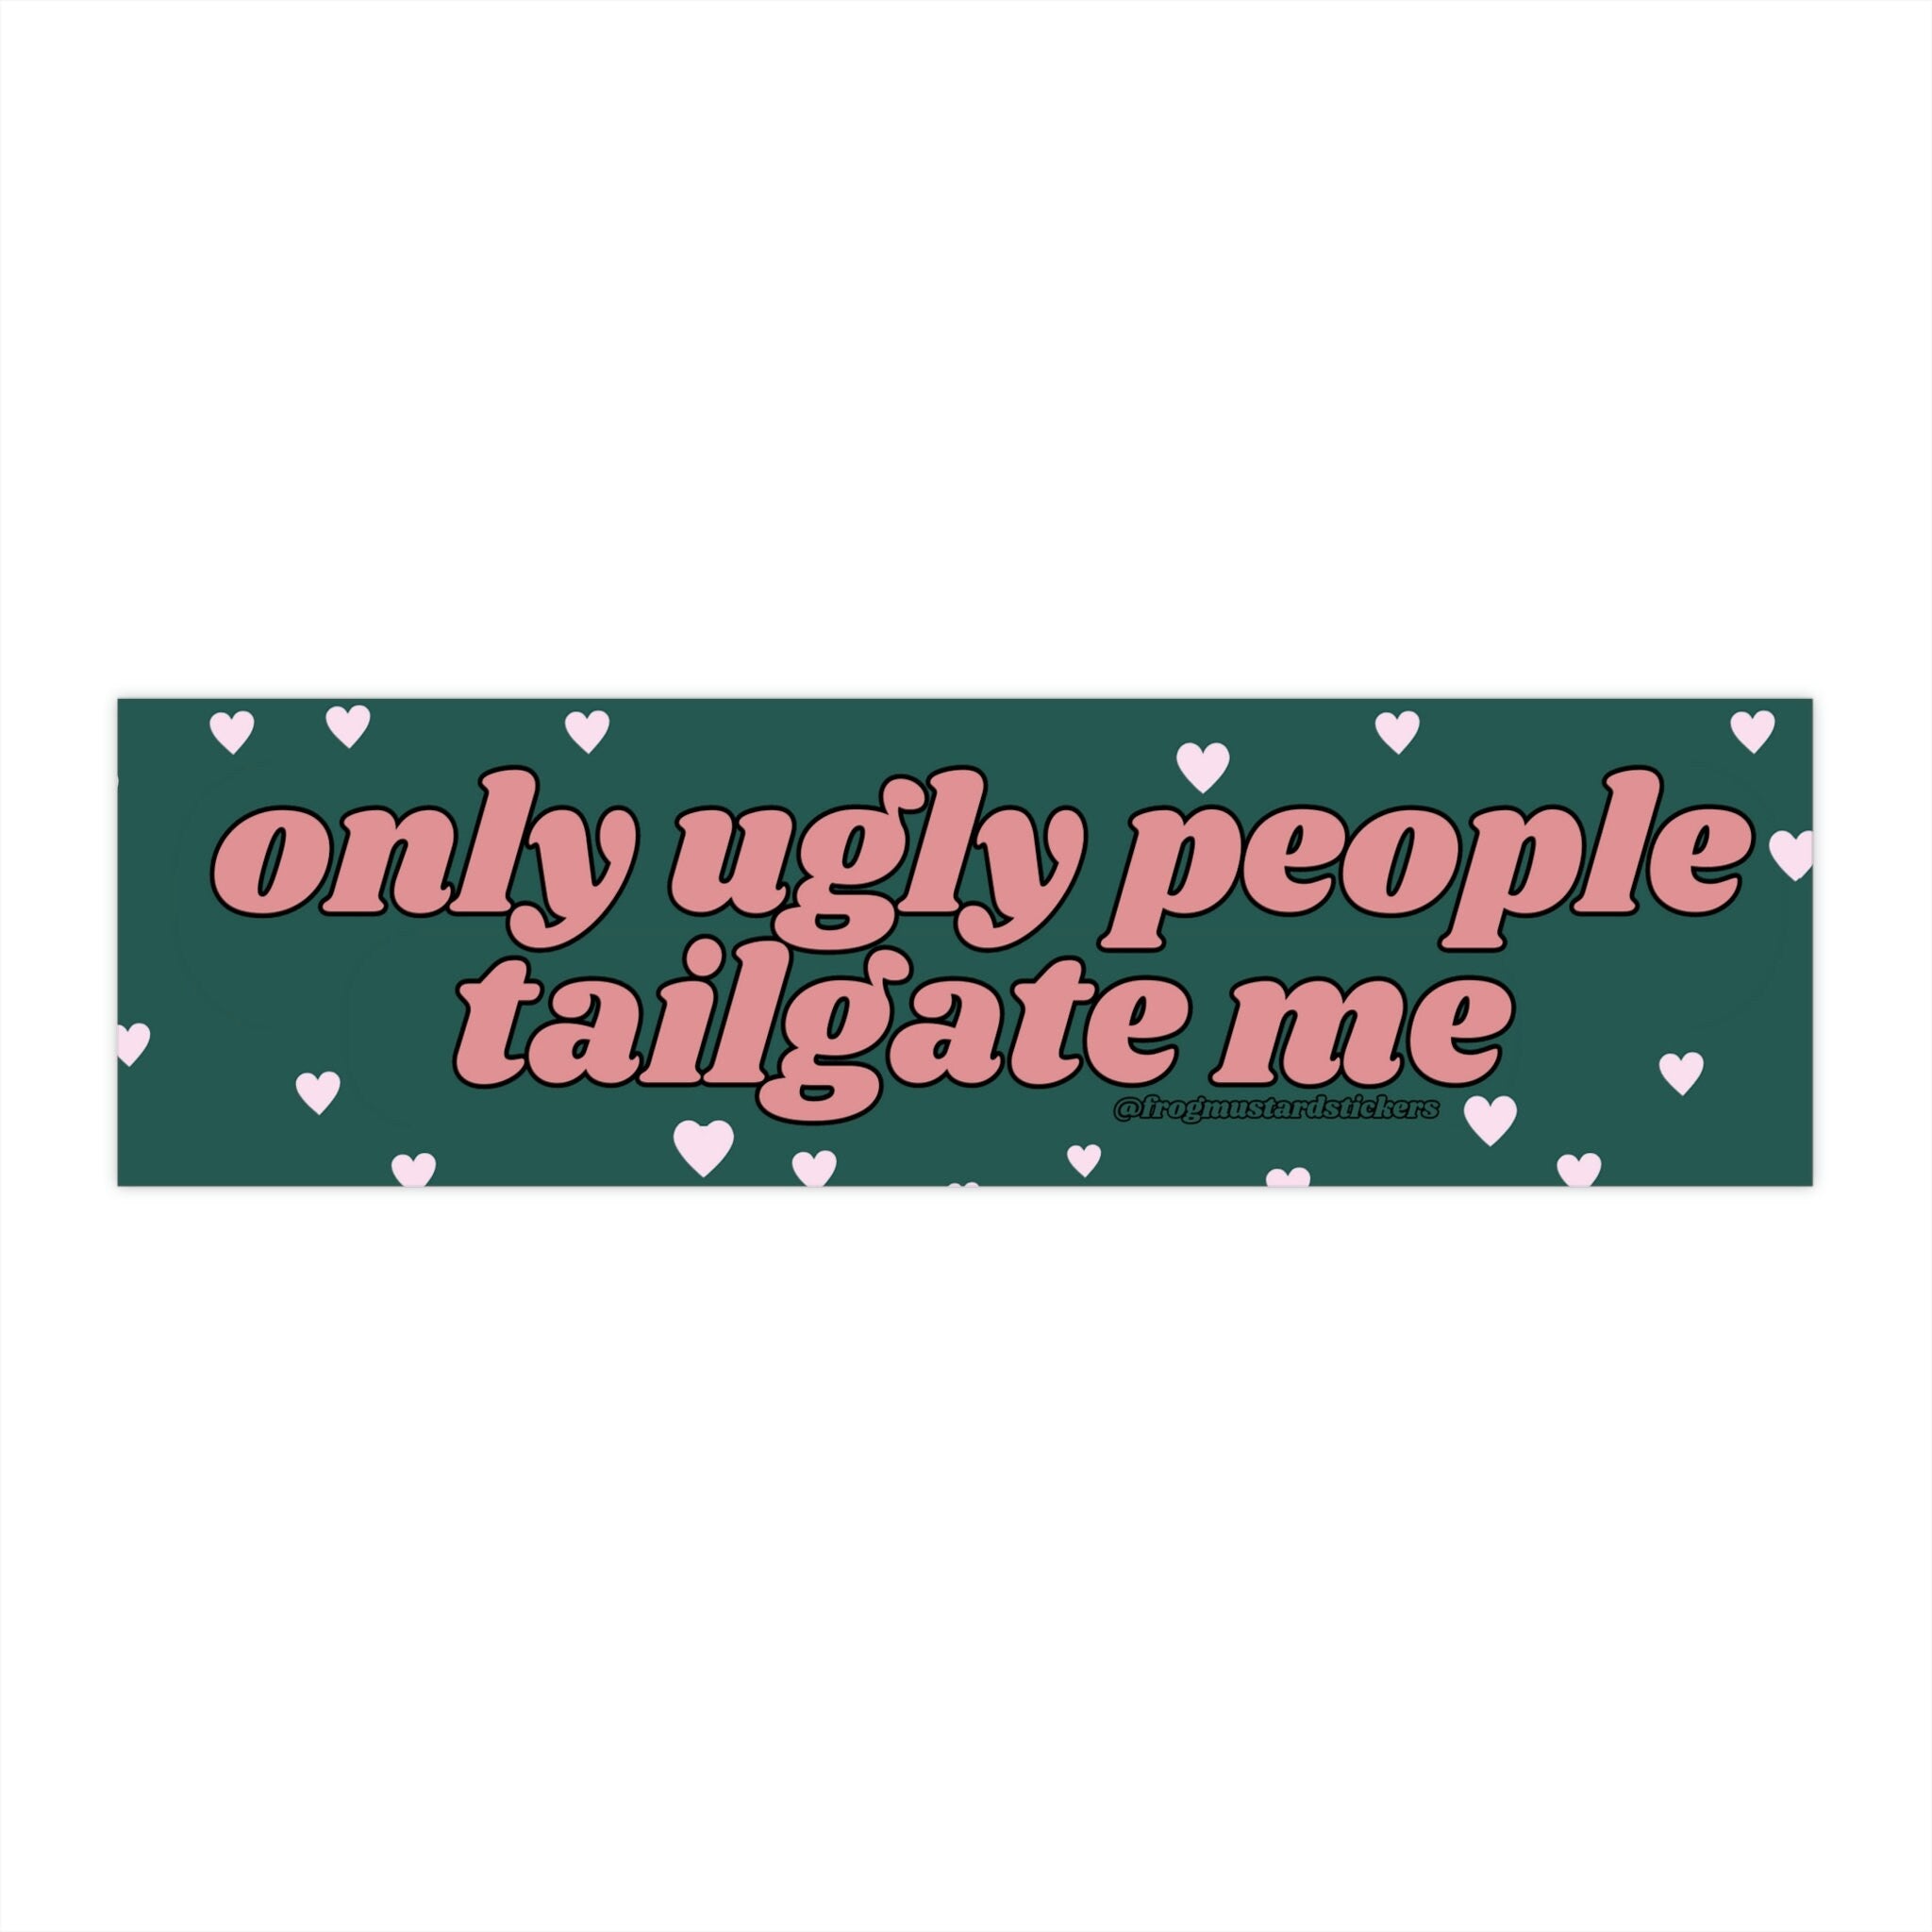 Only Ugly People Tailgate Me